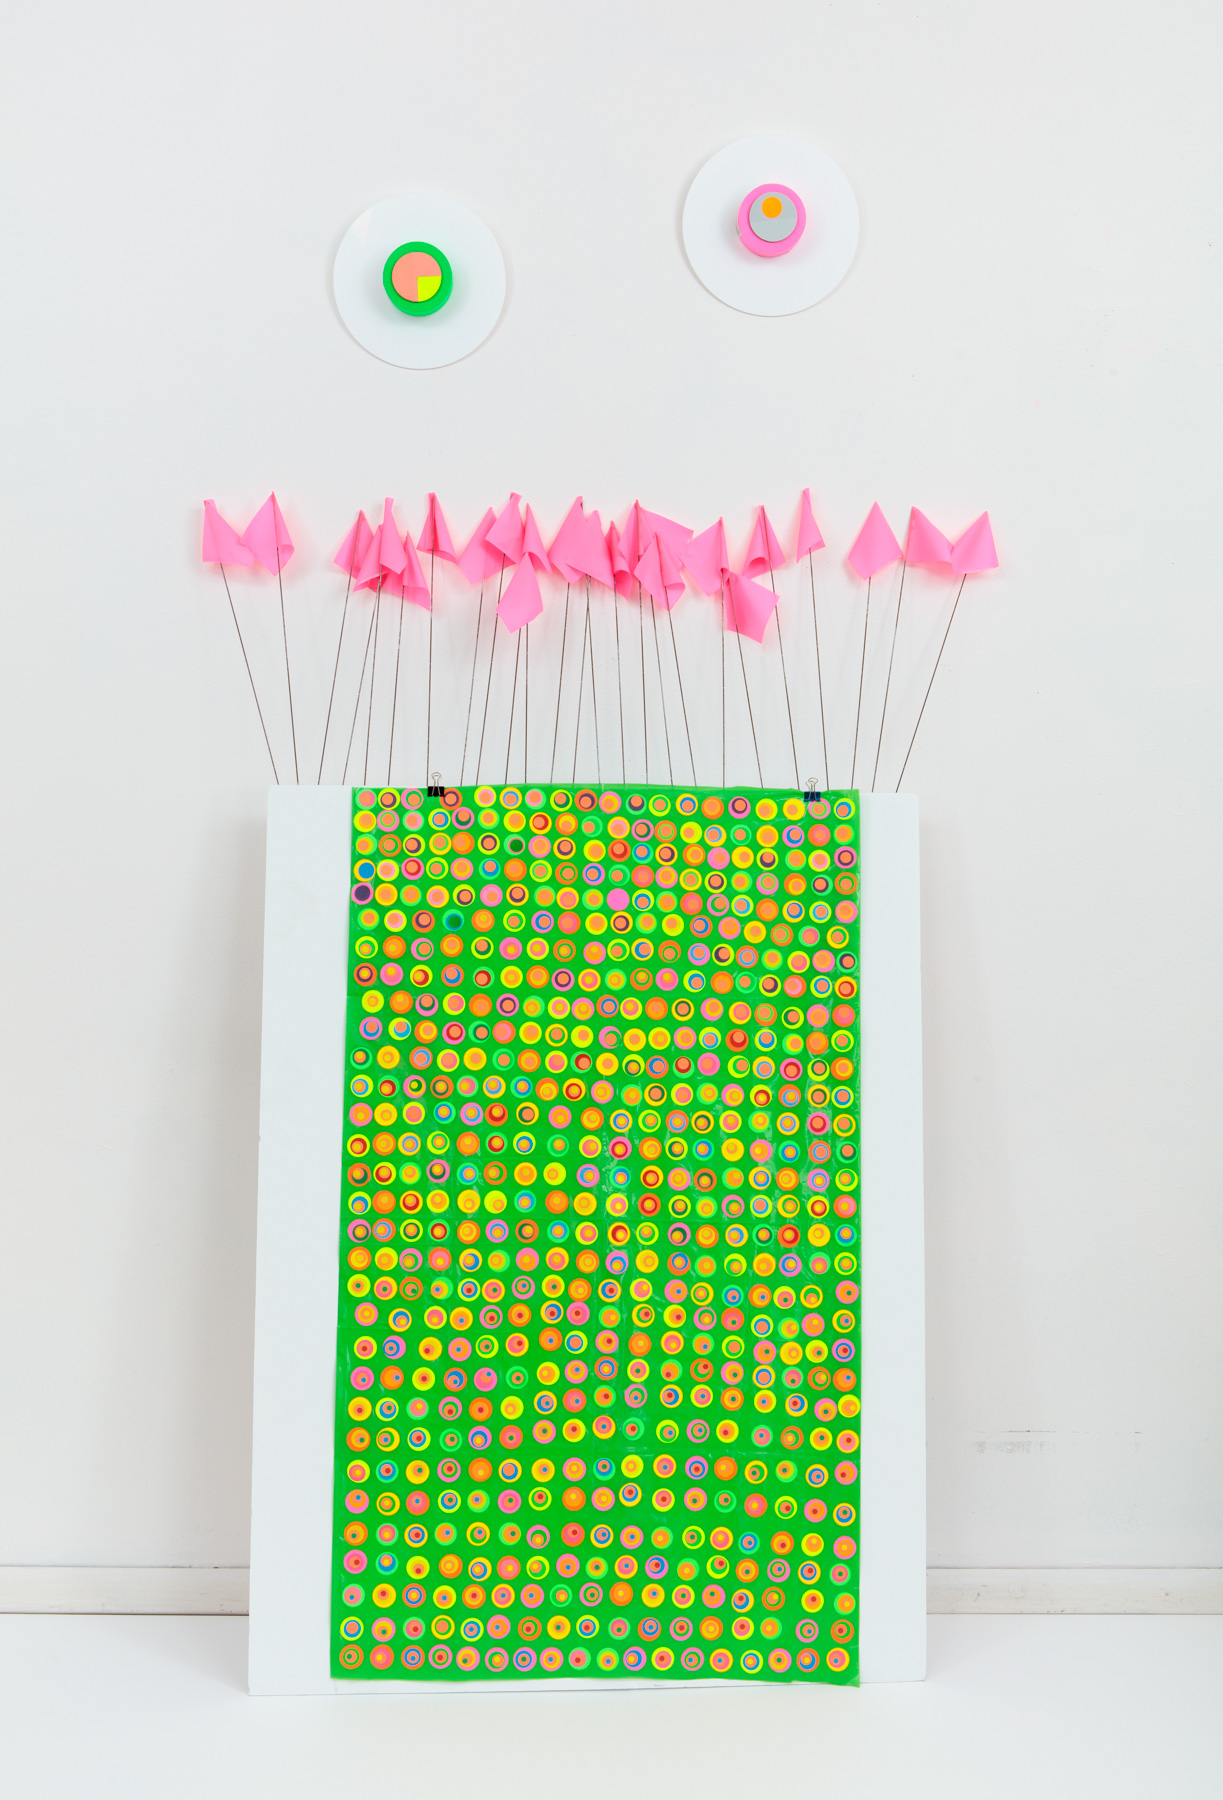 Green plastic sheet covered with brighly colored dots